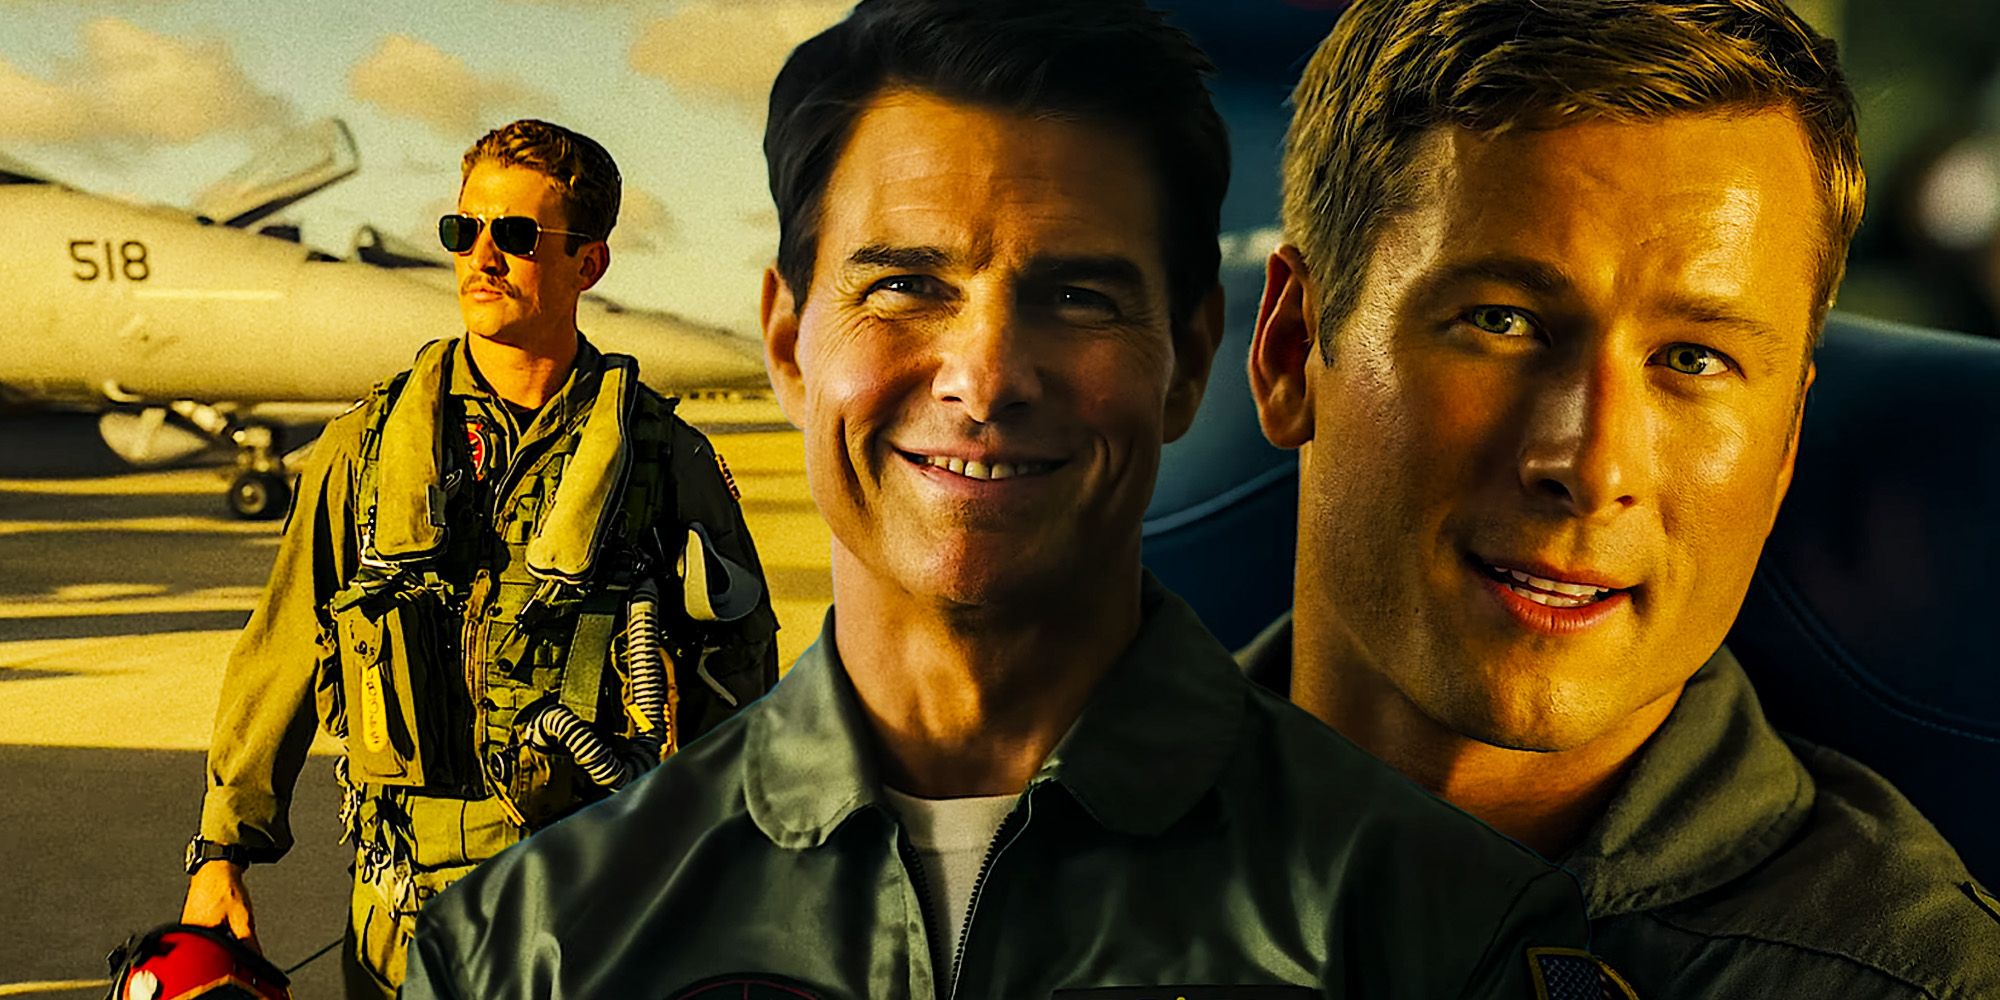 Tom Cruise smiles in an image from Top Gun Maverick imposed over images of Miles Teller and Glen Powell